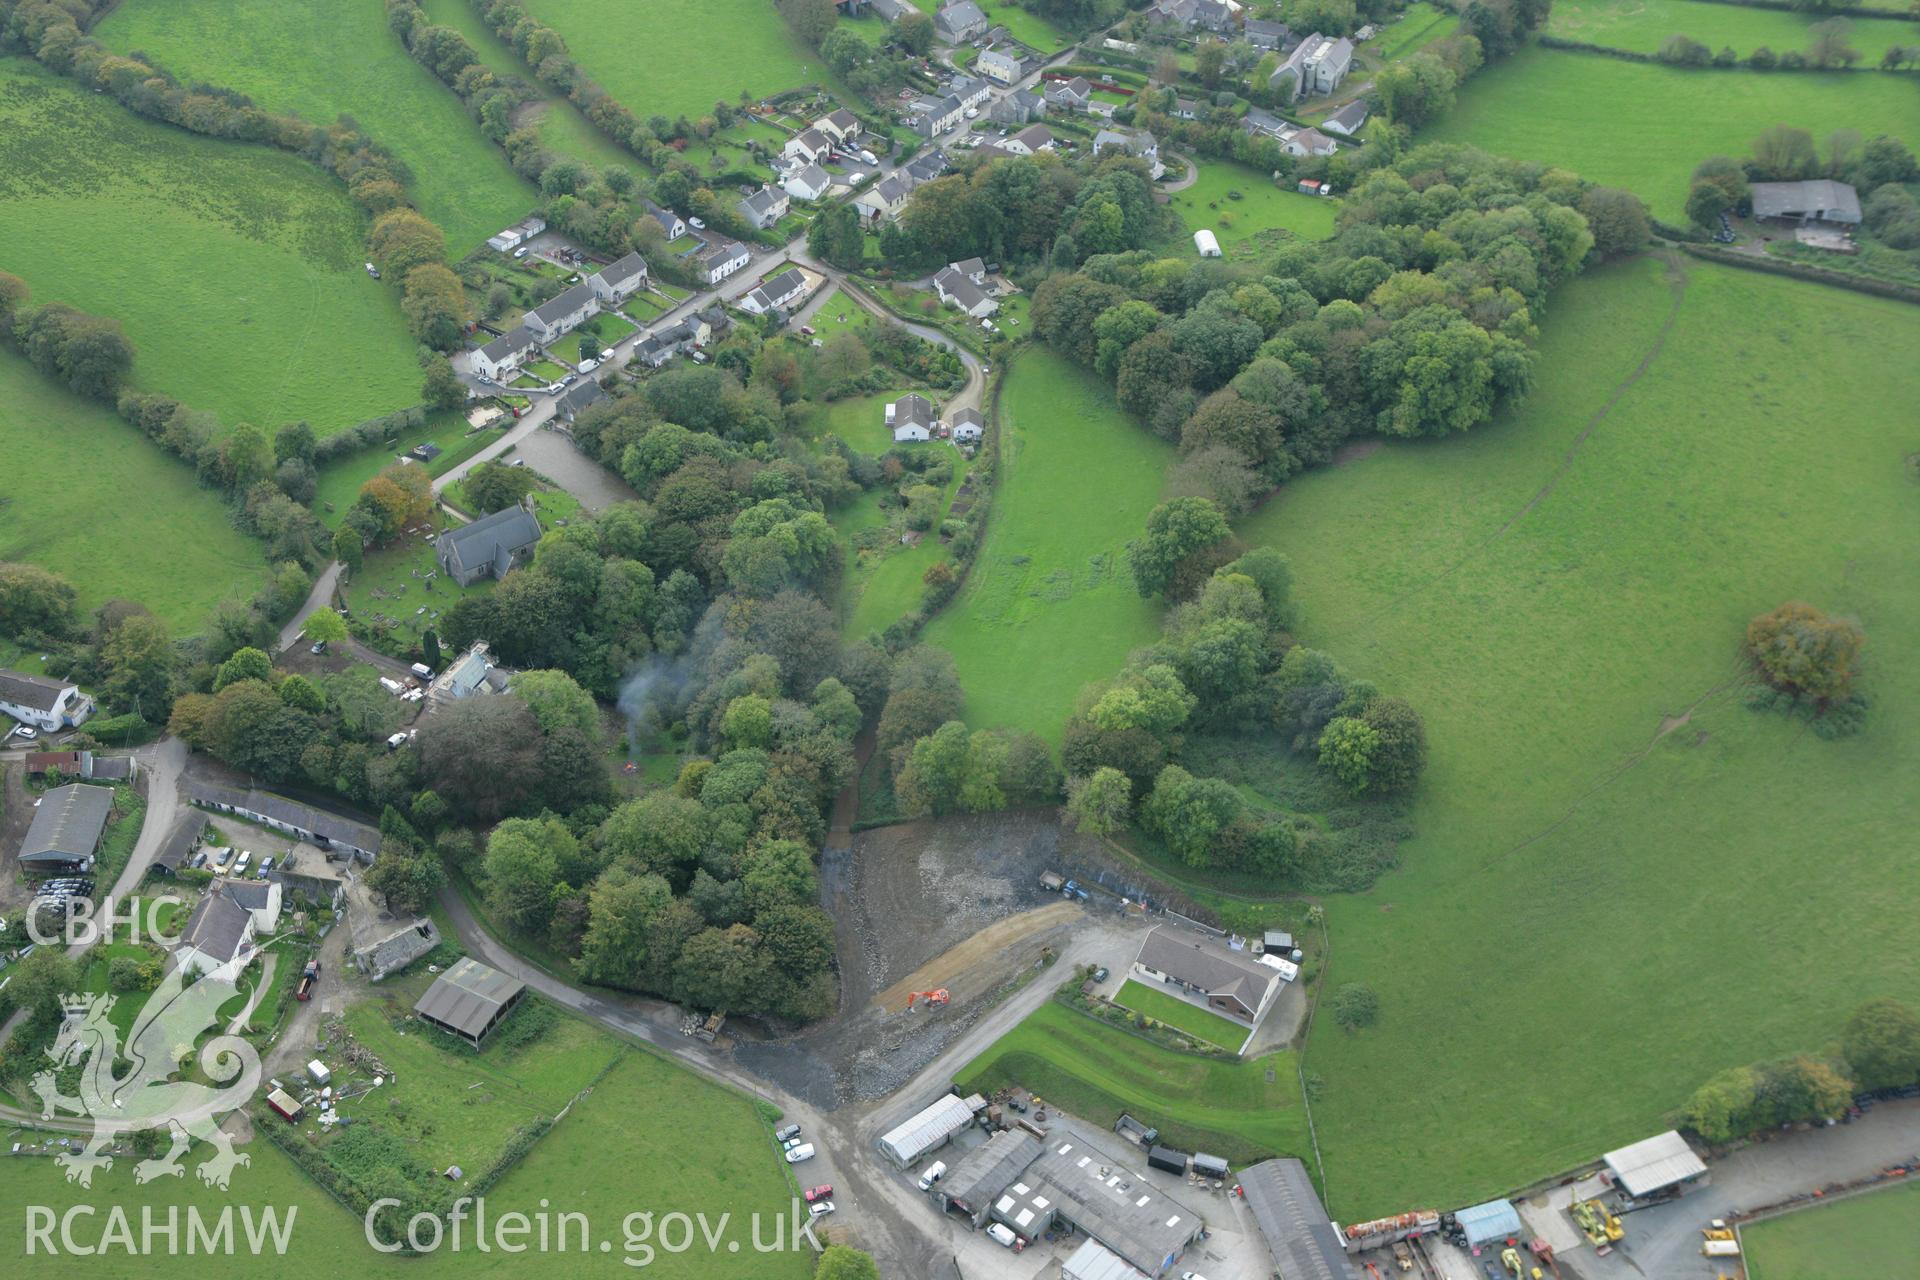 RCAHMW colour oblique aerial photograph of Castell Cynon, Lampeter Velfrey. Taken on 14 October 2009 by Toby Driver